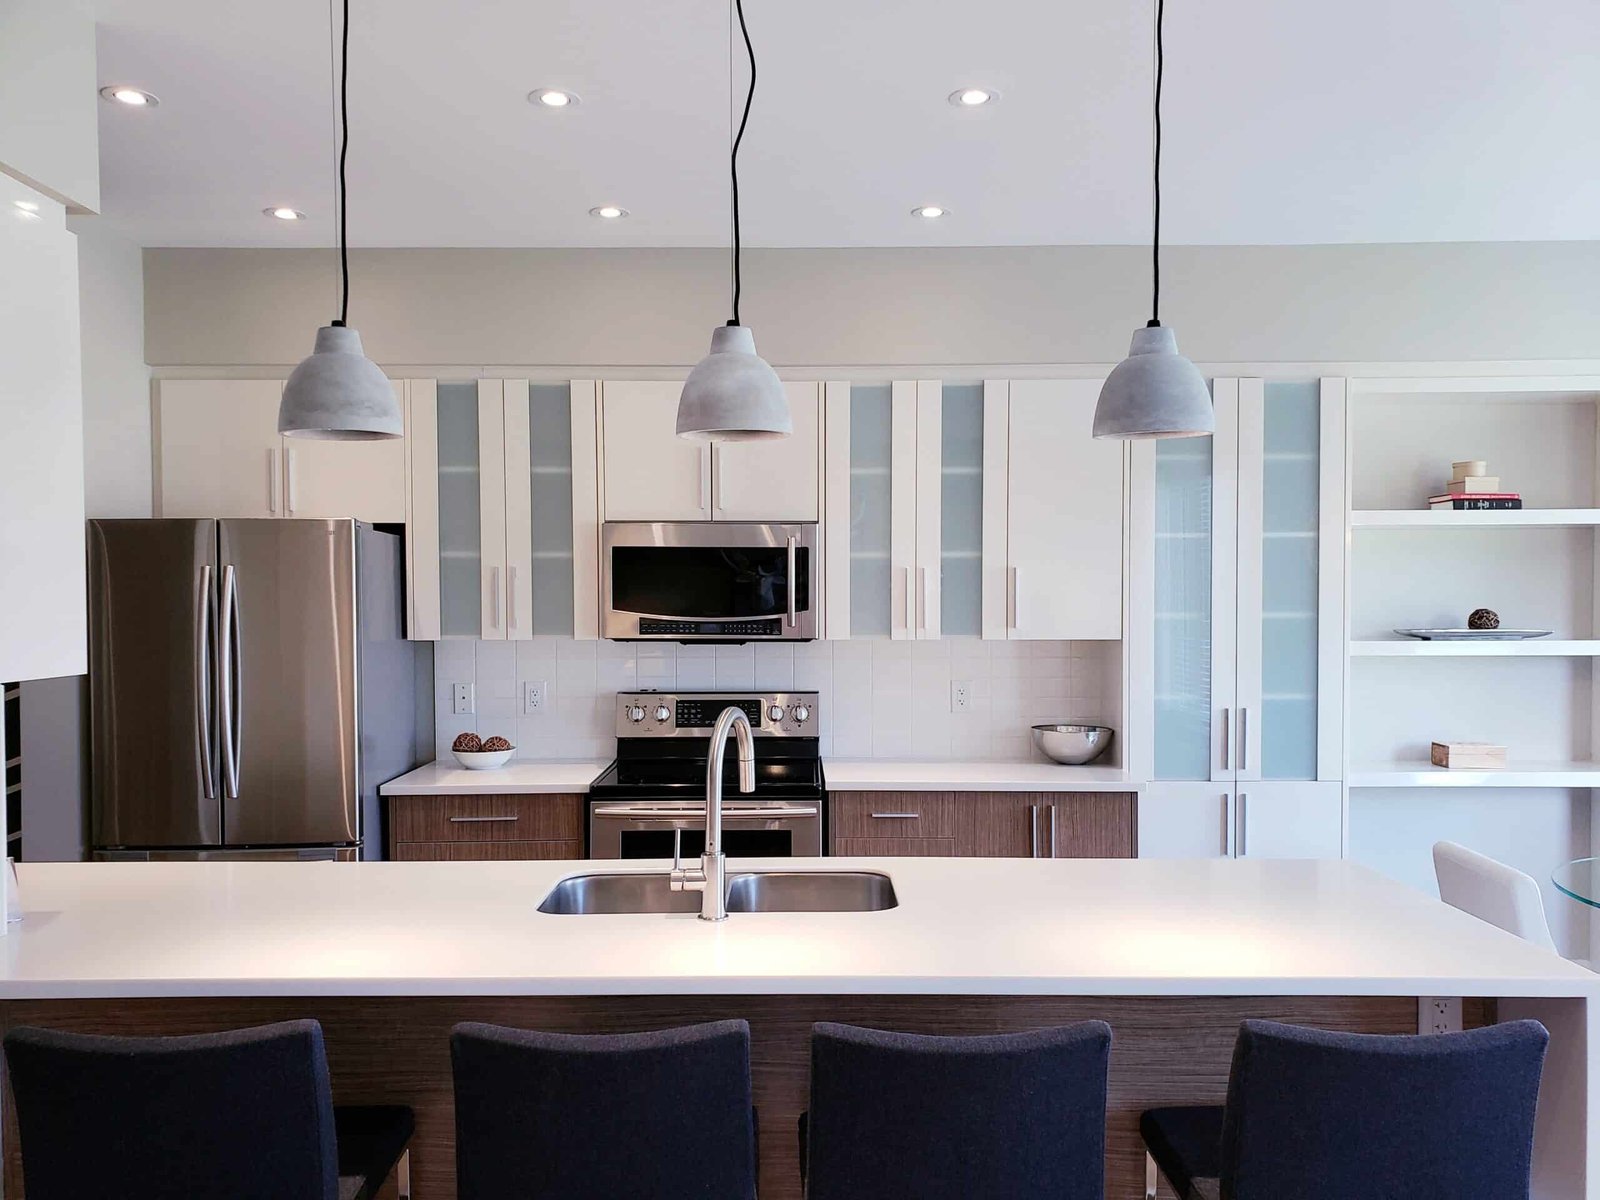 Modern design kitchen cabinets in white and tinted glass, quartz countertop